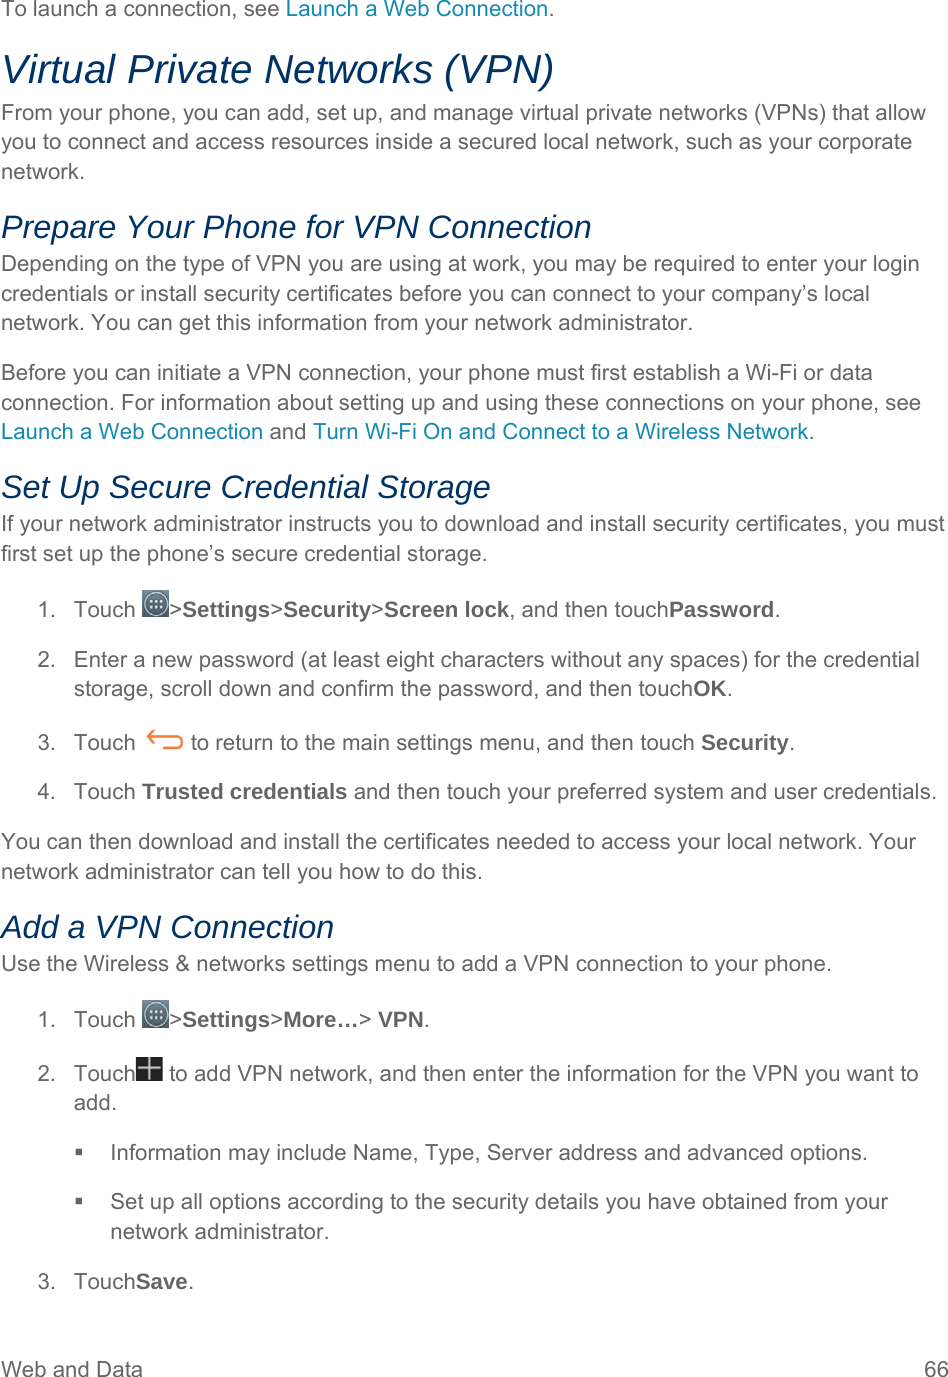 Web and Data  66 To launch a connection, see Launch a Web Connection. Virtual Private Networks (VPN) From your phone, you can add, set up, and manage virtual private networks (VPNs) that allow you to connect and access resources inside a secured local network, such as your corporate network. Prepare Your Phone for VPN Connection Depending on the type of VPN you are using at work, you may be required to enter your login credentials or install security certificates before you can connect to your company’s local network. You can get this information from your network administrator. Before you can initiate a VPN connection, your phone must first establish a Wi-Fi or data connection. For information about setting up and using these connections on your phone, see Launch a Web Connection and Turn Wi-Fi On and Connect to a Wireless Network. Set Up Secure Credential Storage If your network administrator instructs you to download and install security certificates, you must first set up the phone’s secure credential storage. 1. Touch  &gt;Settings&gt;Security&gt;Screen lock, and then touchPassword. 2.  Enter a new password (at least eight characters without any spaces) for the credential storage, scroll down and confirm the password, and then touchOK. 3.  Touch   to return to the main settings menu, and then touch Security. 4. Touch Trusted credentials and then touch your preferred system and user credentials. You can then download and install the certificates needed to access your local network. Your network administrator can tell you how to do this. Add a VPN Connection Use the Wireless &amp; networks settings menu to add a VPN connection to your phone. 1. Touch  &gt;Settings&gt;More…&gt; VPN. 2.  Touch  to add VPN network, and then enter the information for the VPN you want to add.   Information may include Name, Type, Server address and advanced options.   Set up all options according to the security details you have obtained from your network administrator. 3. TouchSave. 